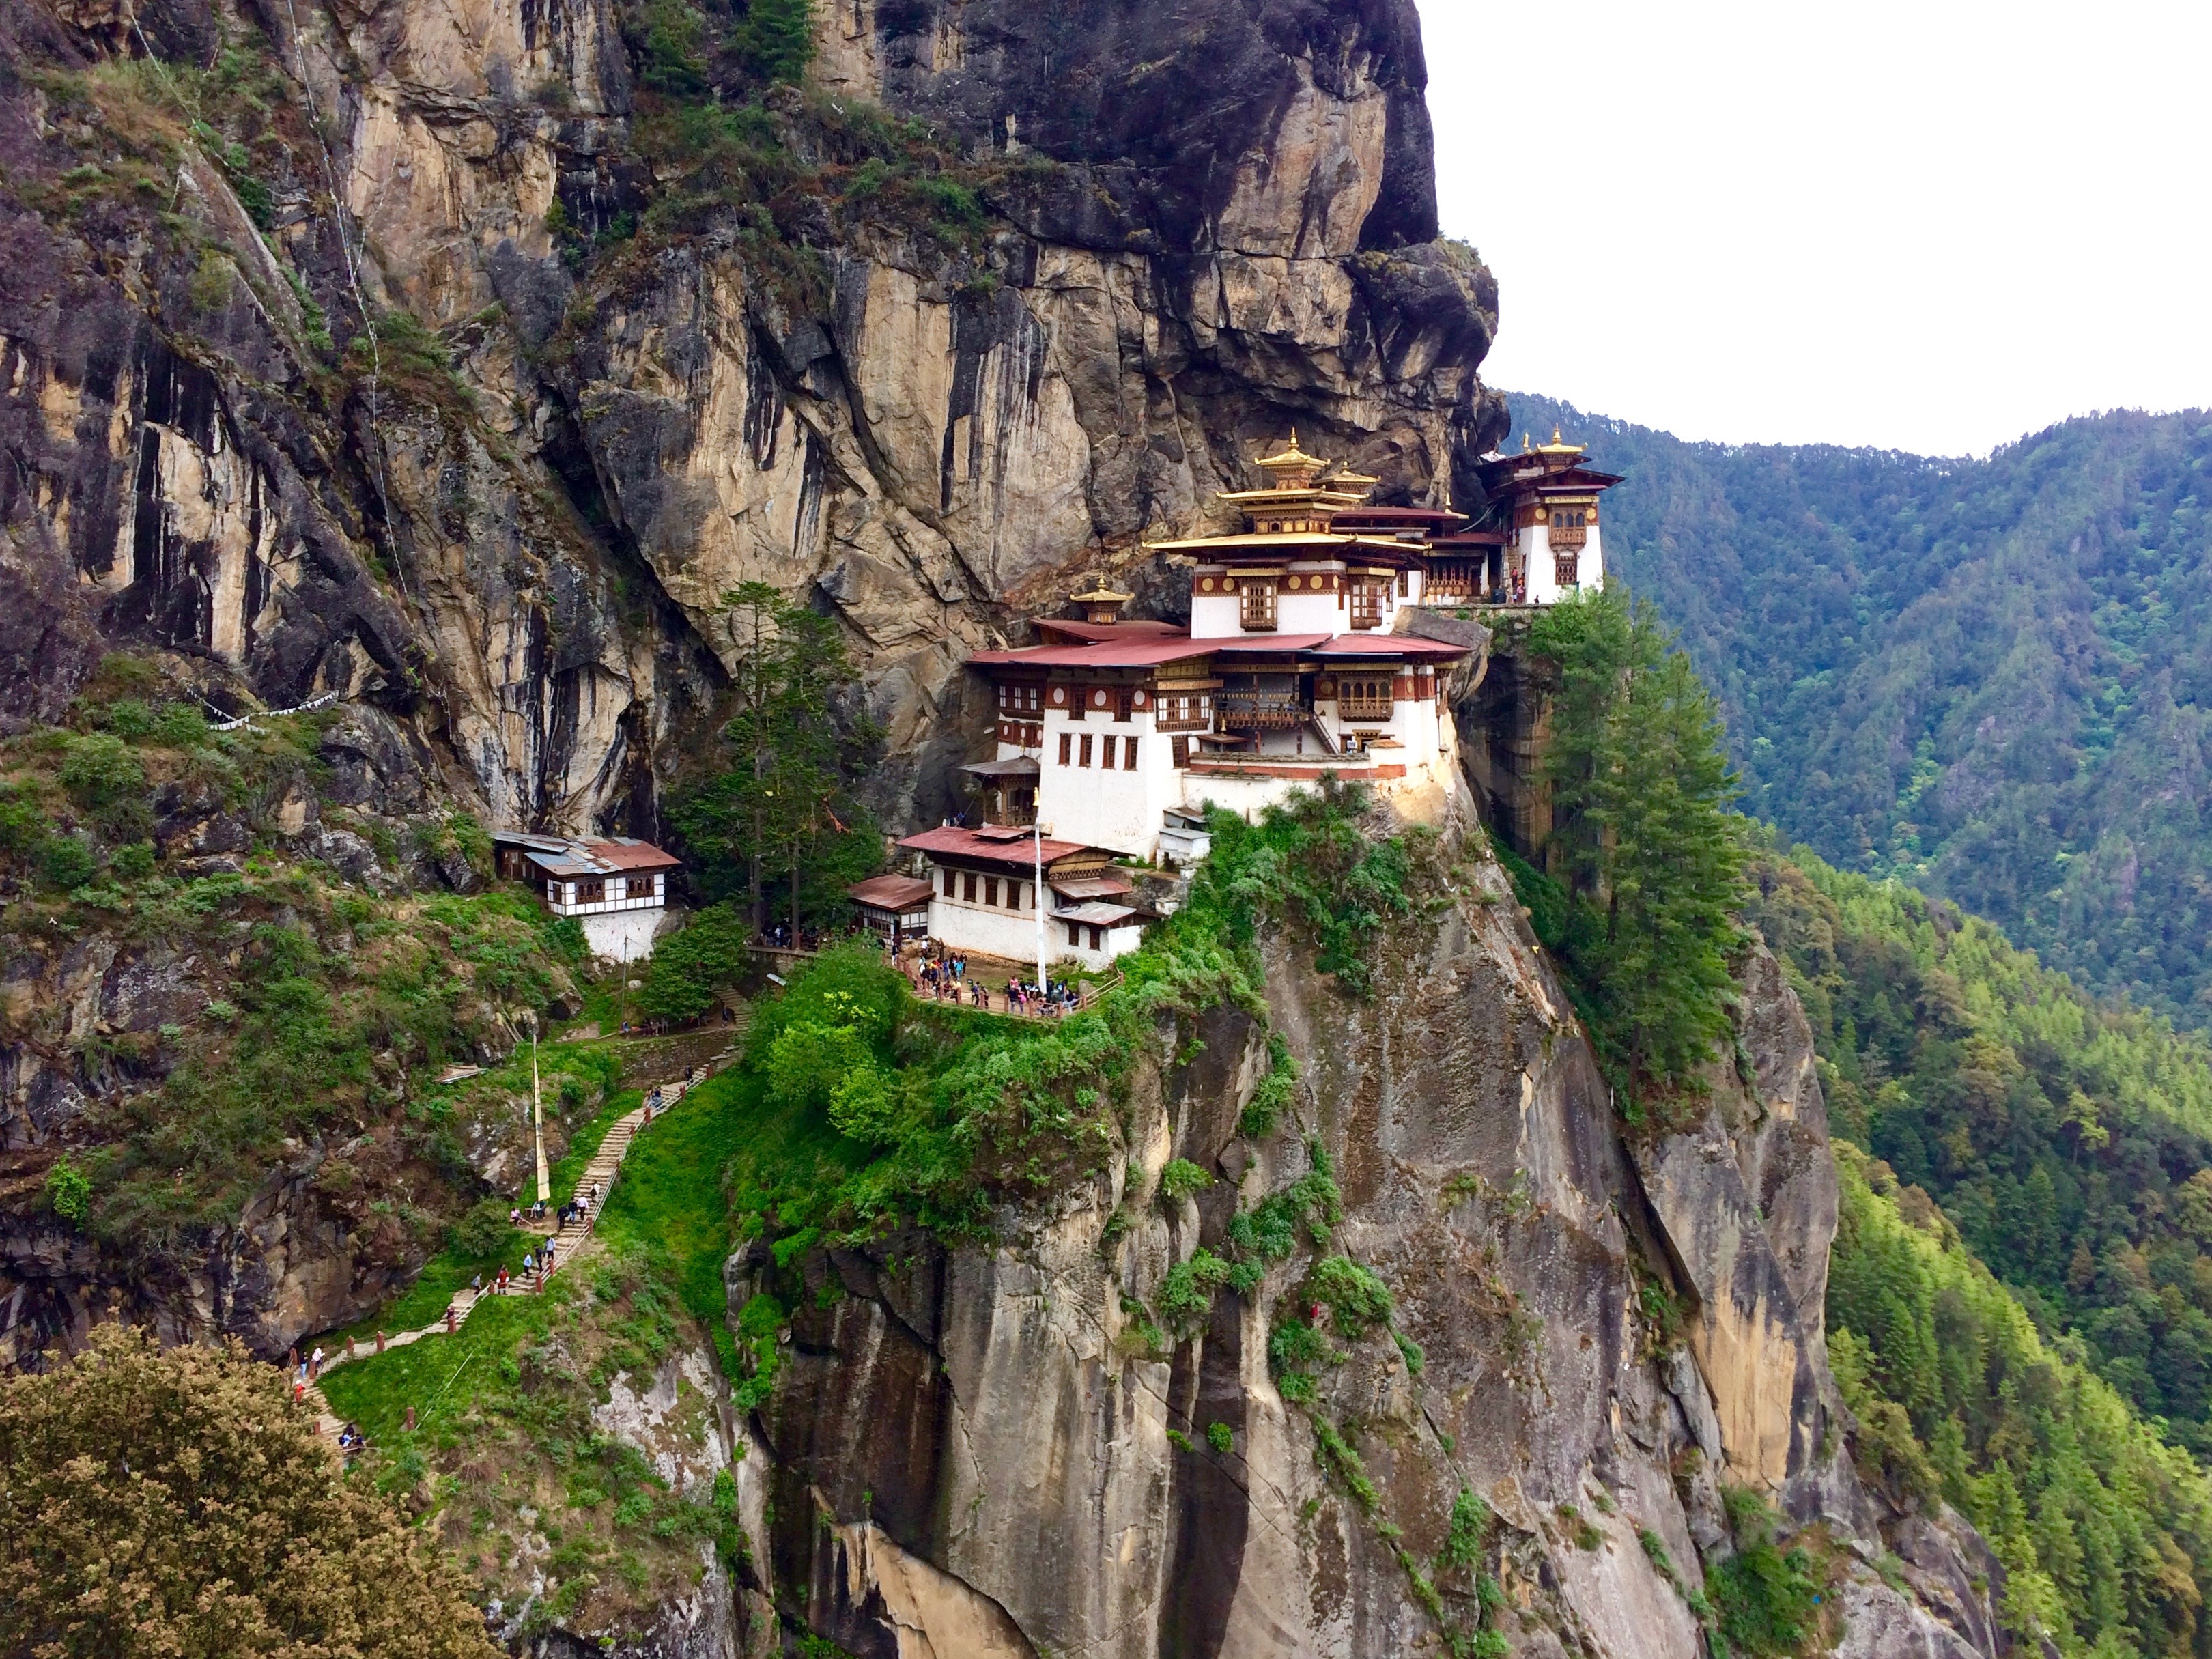 How Bhutan Avoids Being Overrun by Tourists